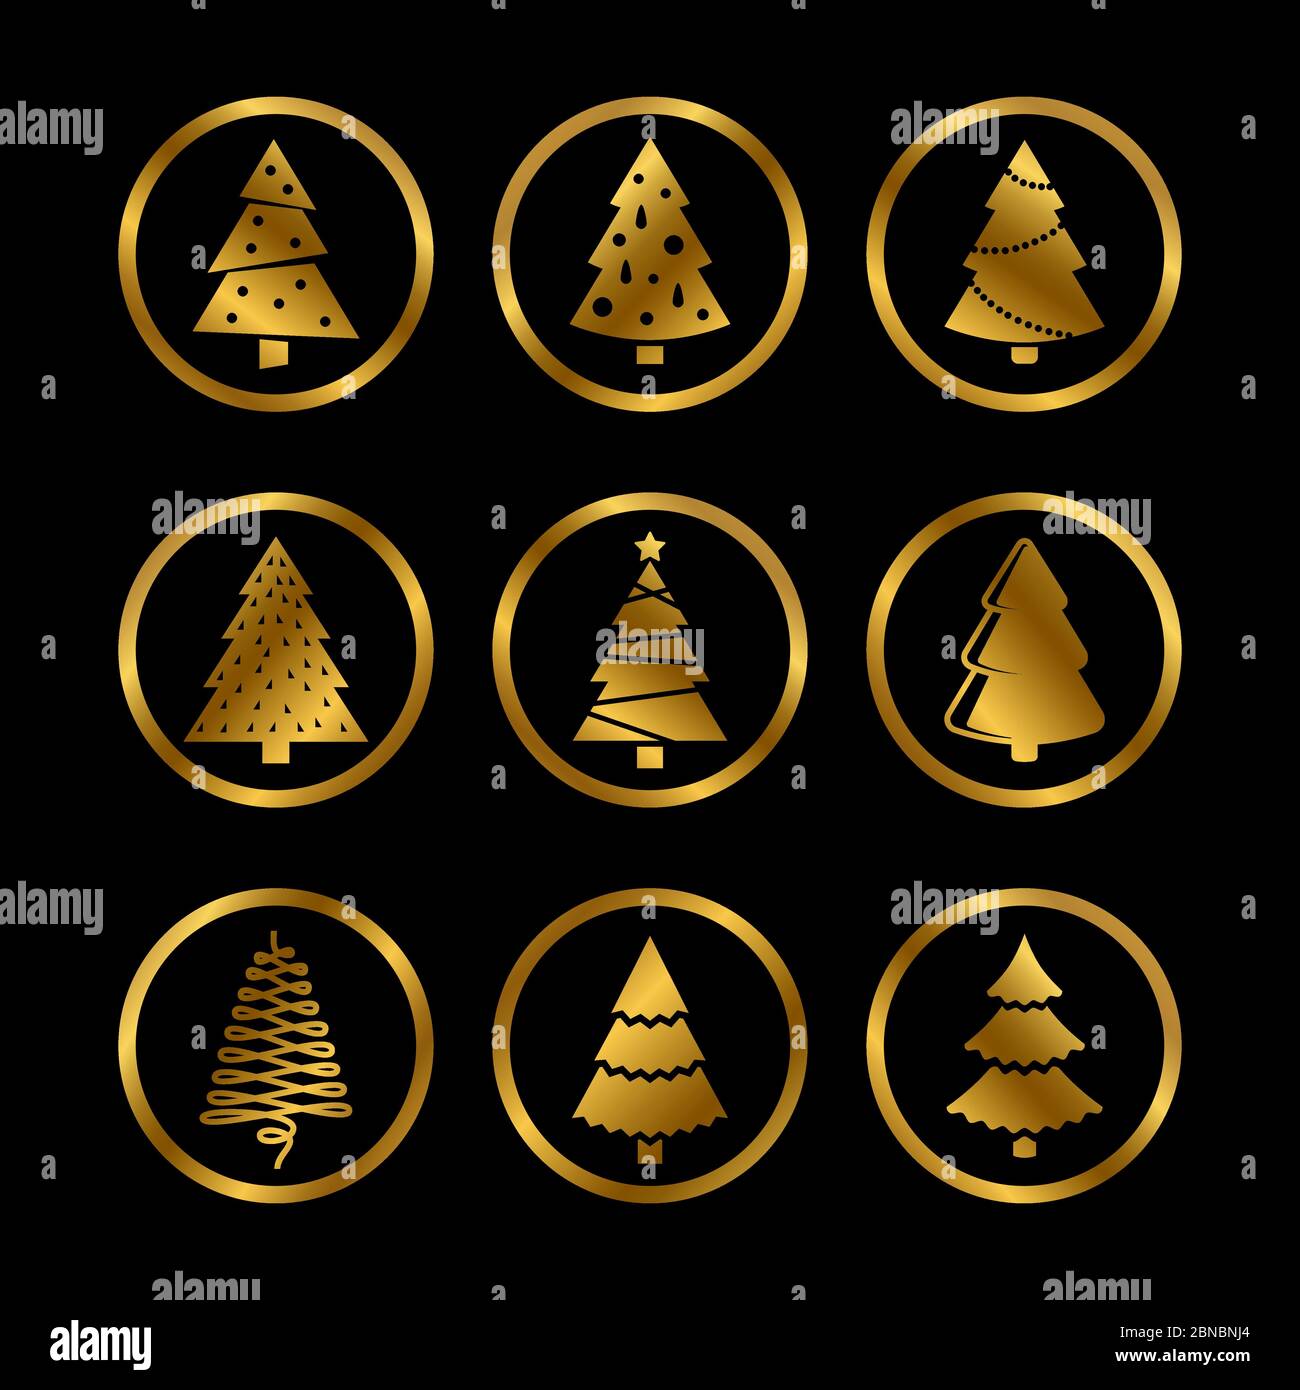 Gold bright silhouette christmas trees vector stylized icons on black background illustration Stock Vector